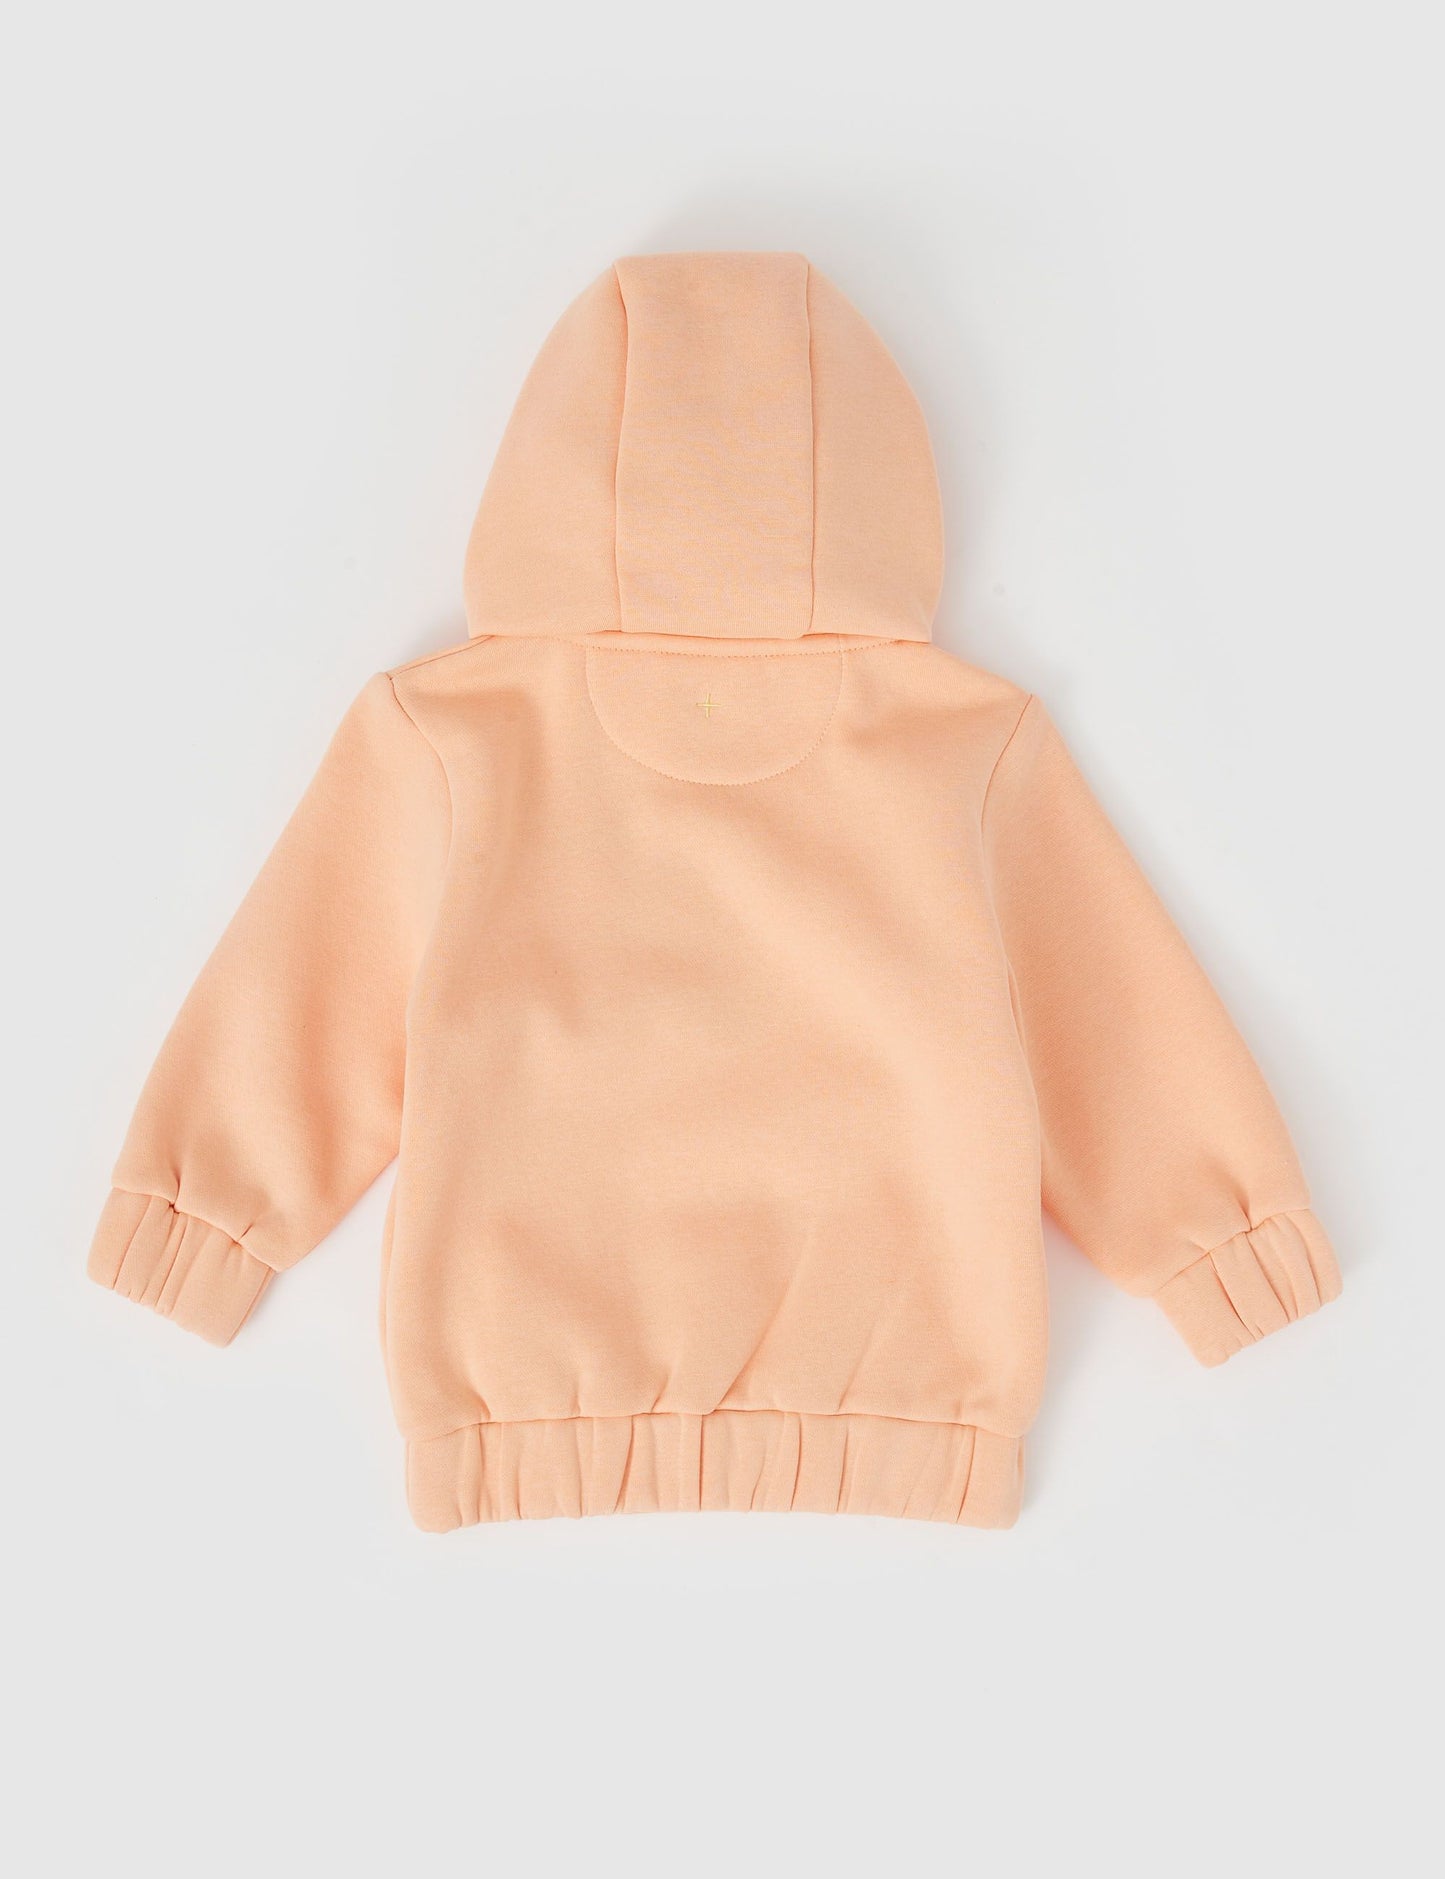 Goldie + Ace - Dylan Hooded Sweater (Peach)